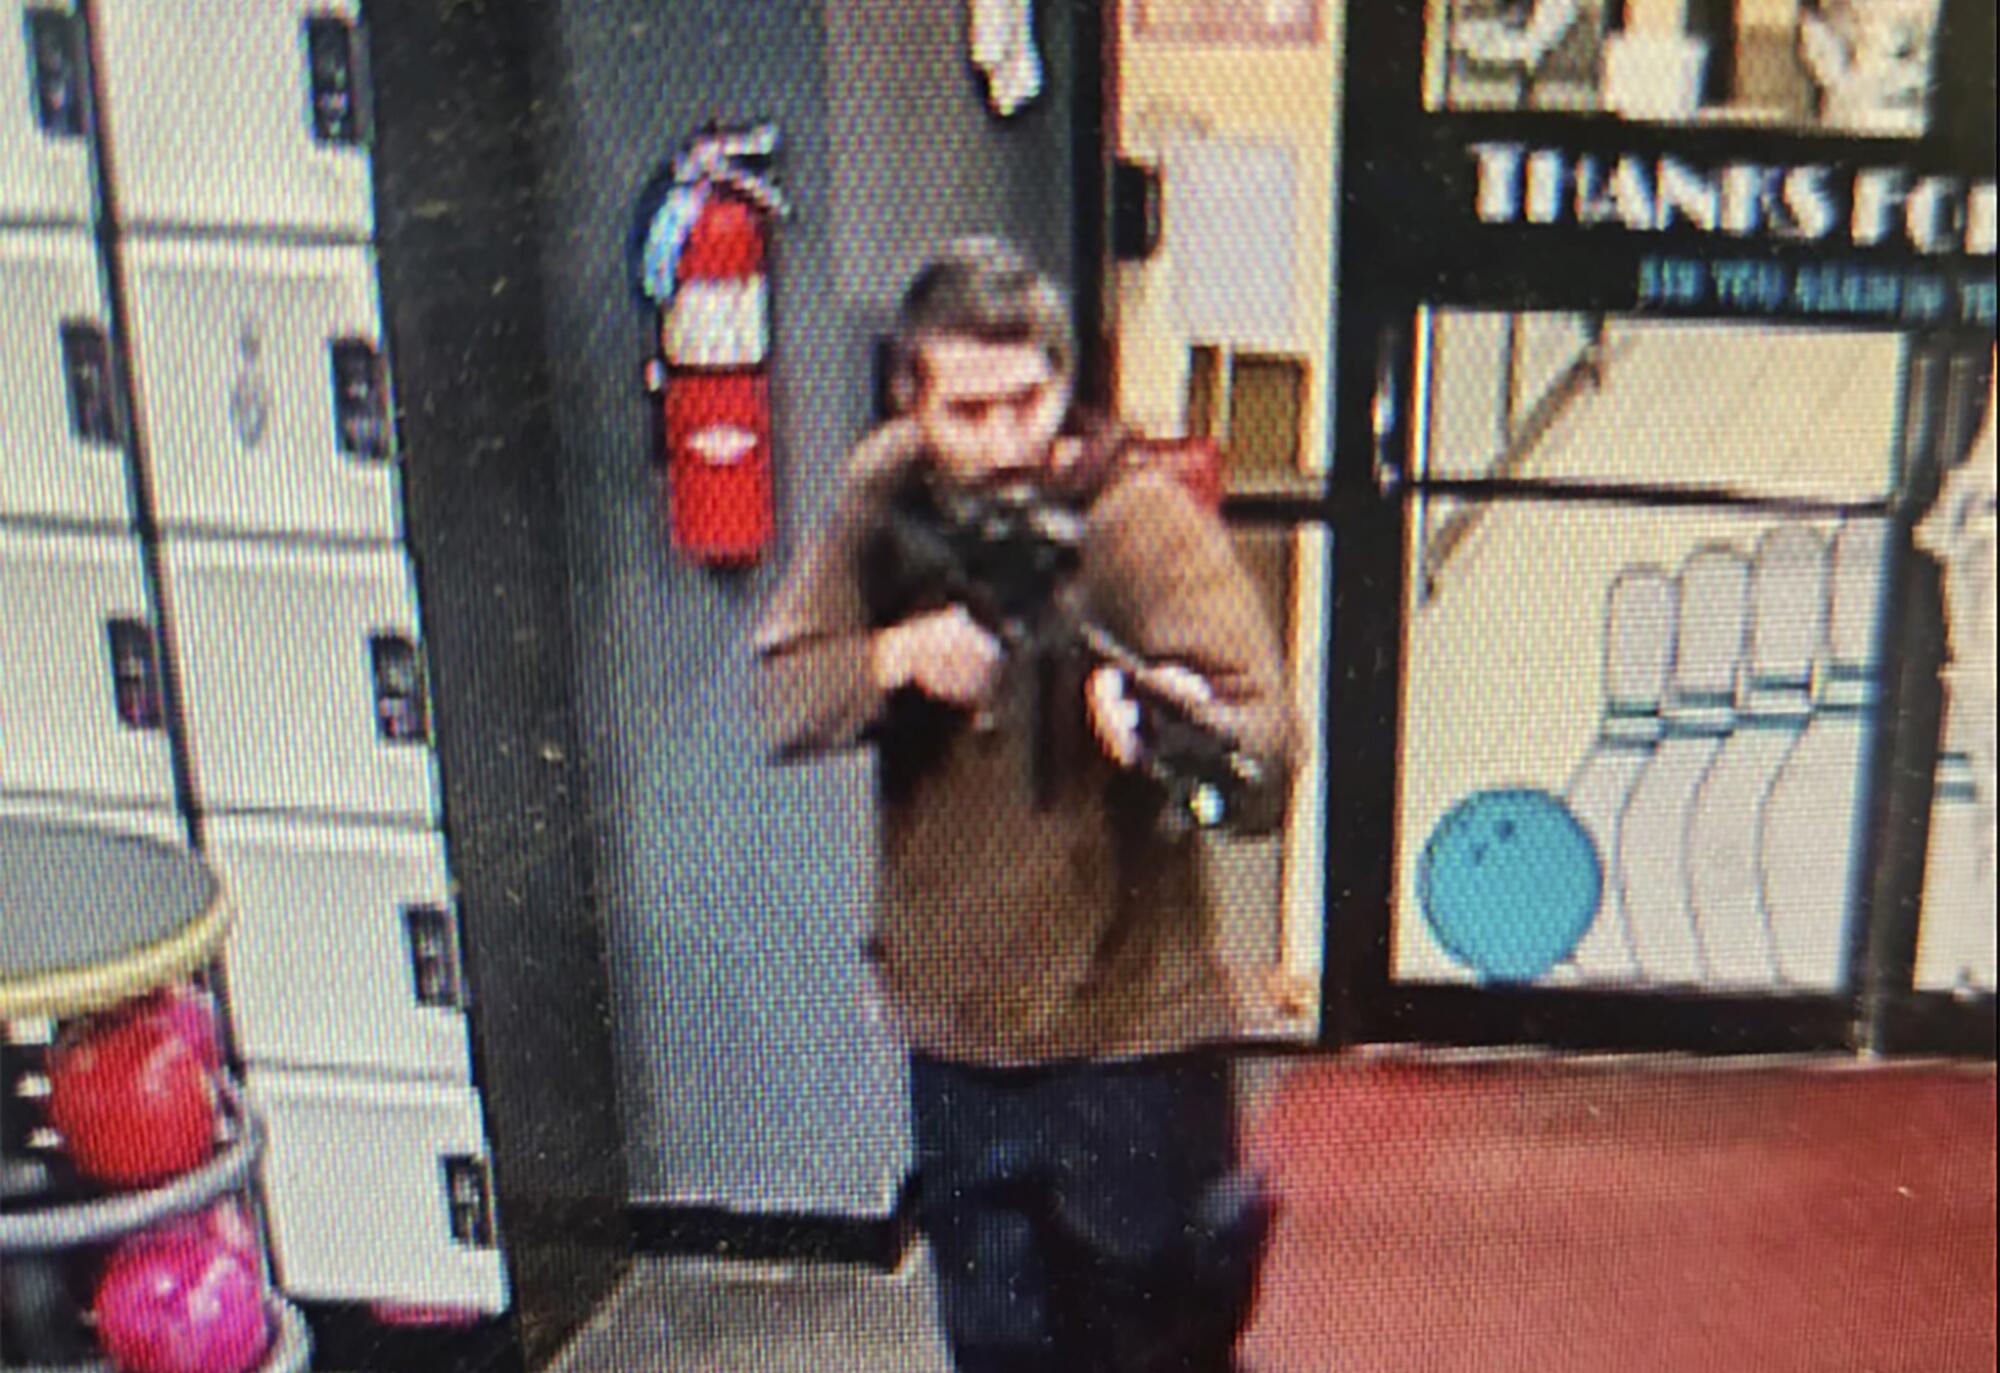 A man pointing an assault-style rifle inside a bowling alley